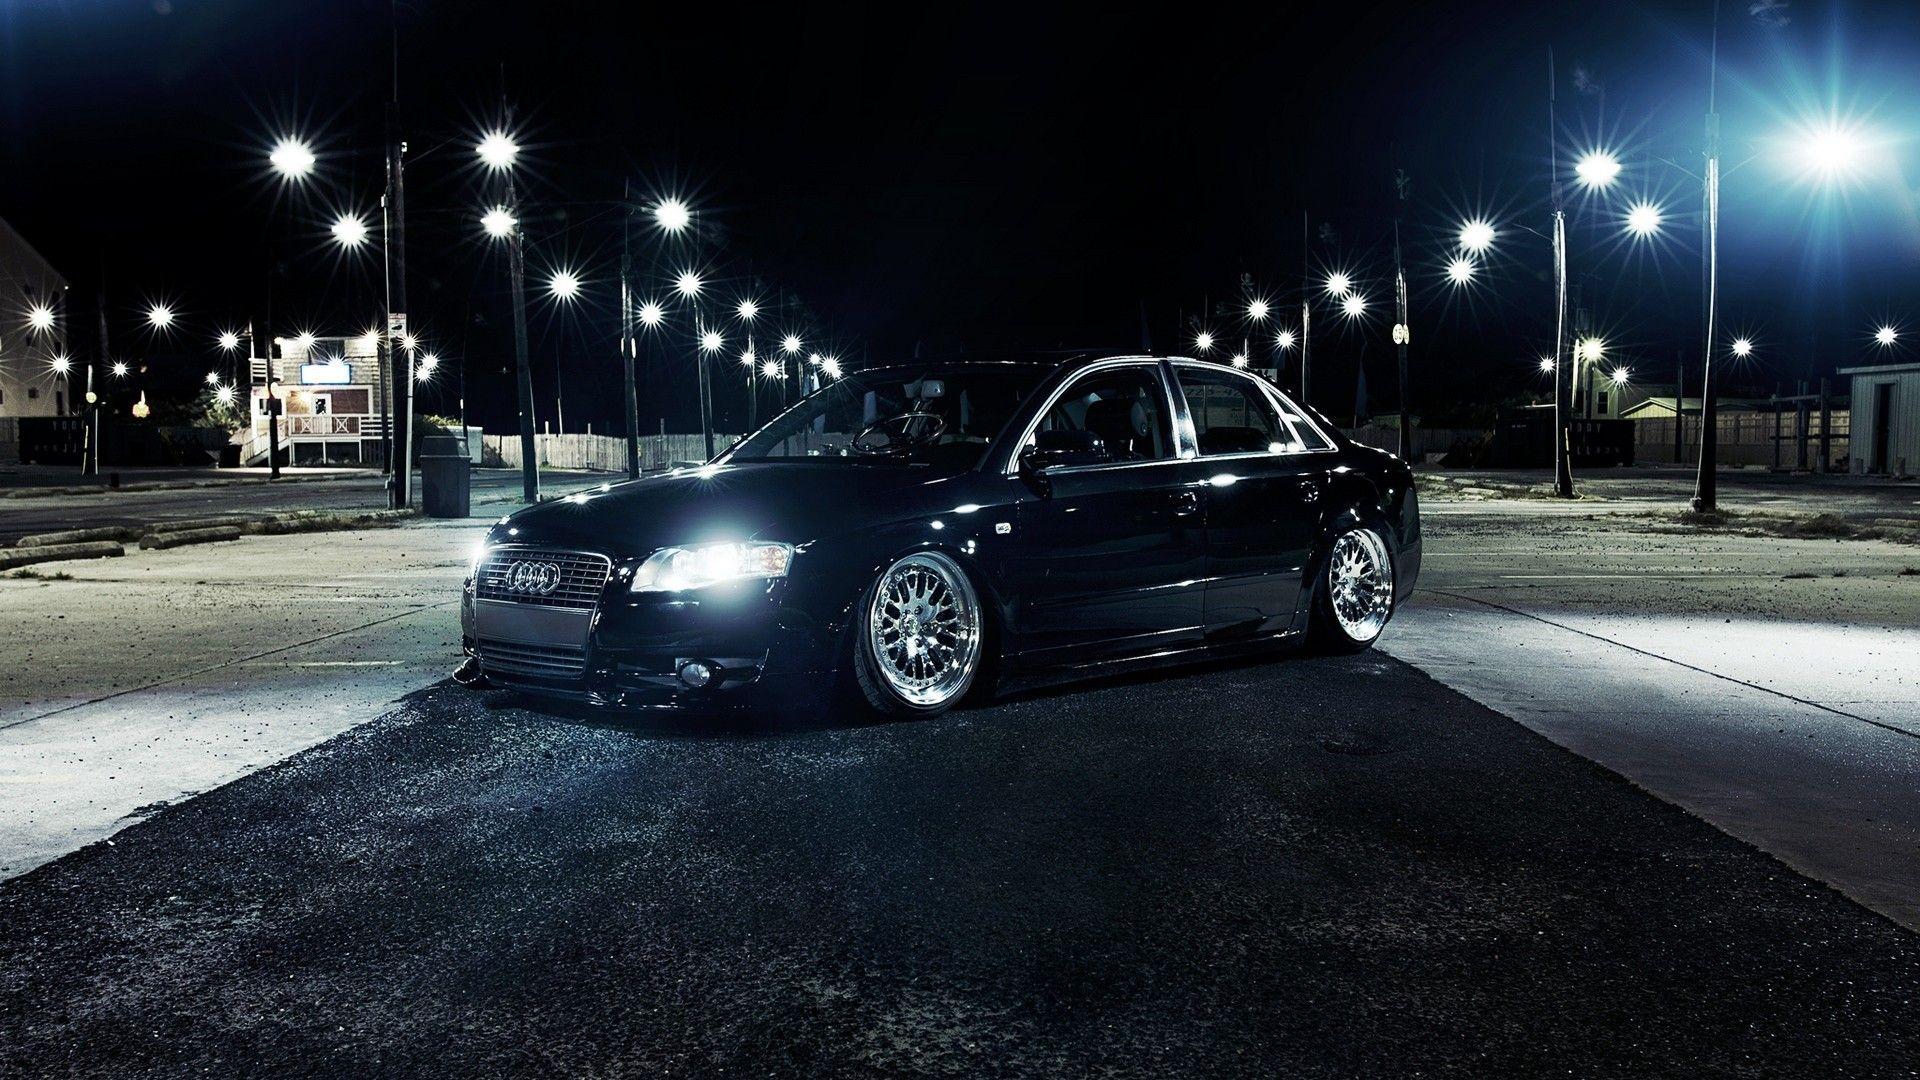 Audi A4 Wallpaper, Gallery of 41 Audi A4 Background, Wallpaper